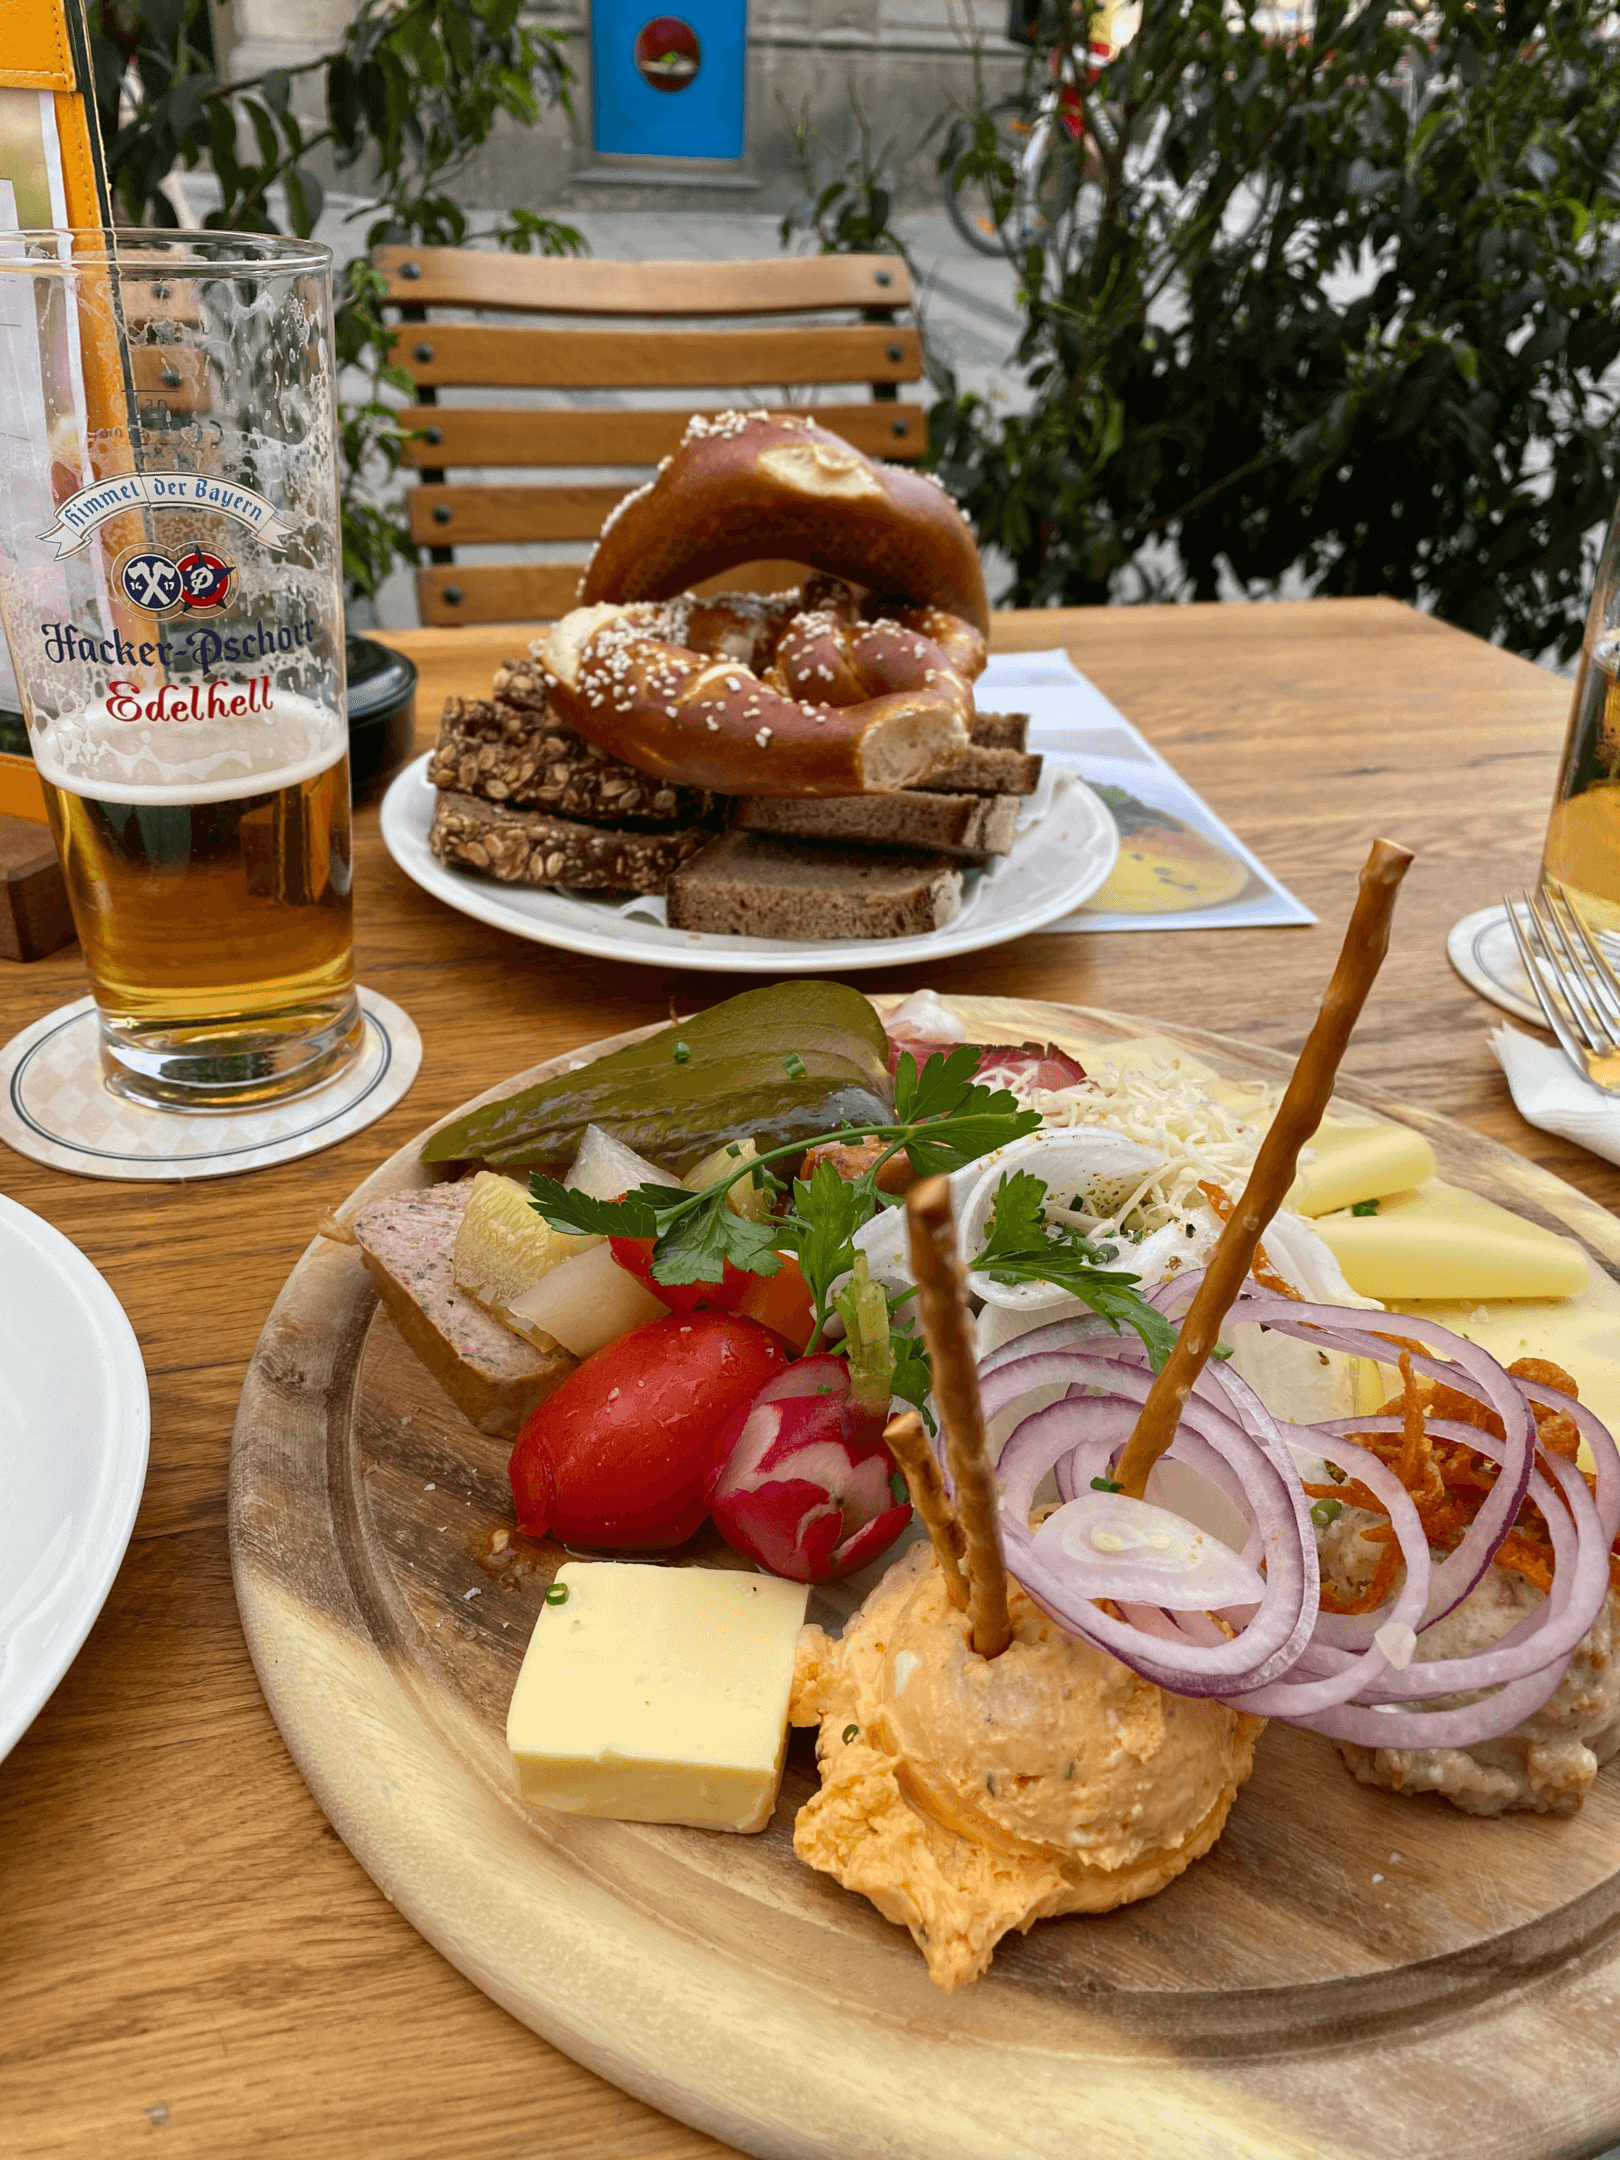 Bavarian Food and Beer in Munich